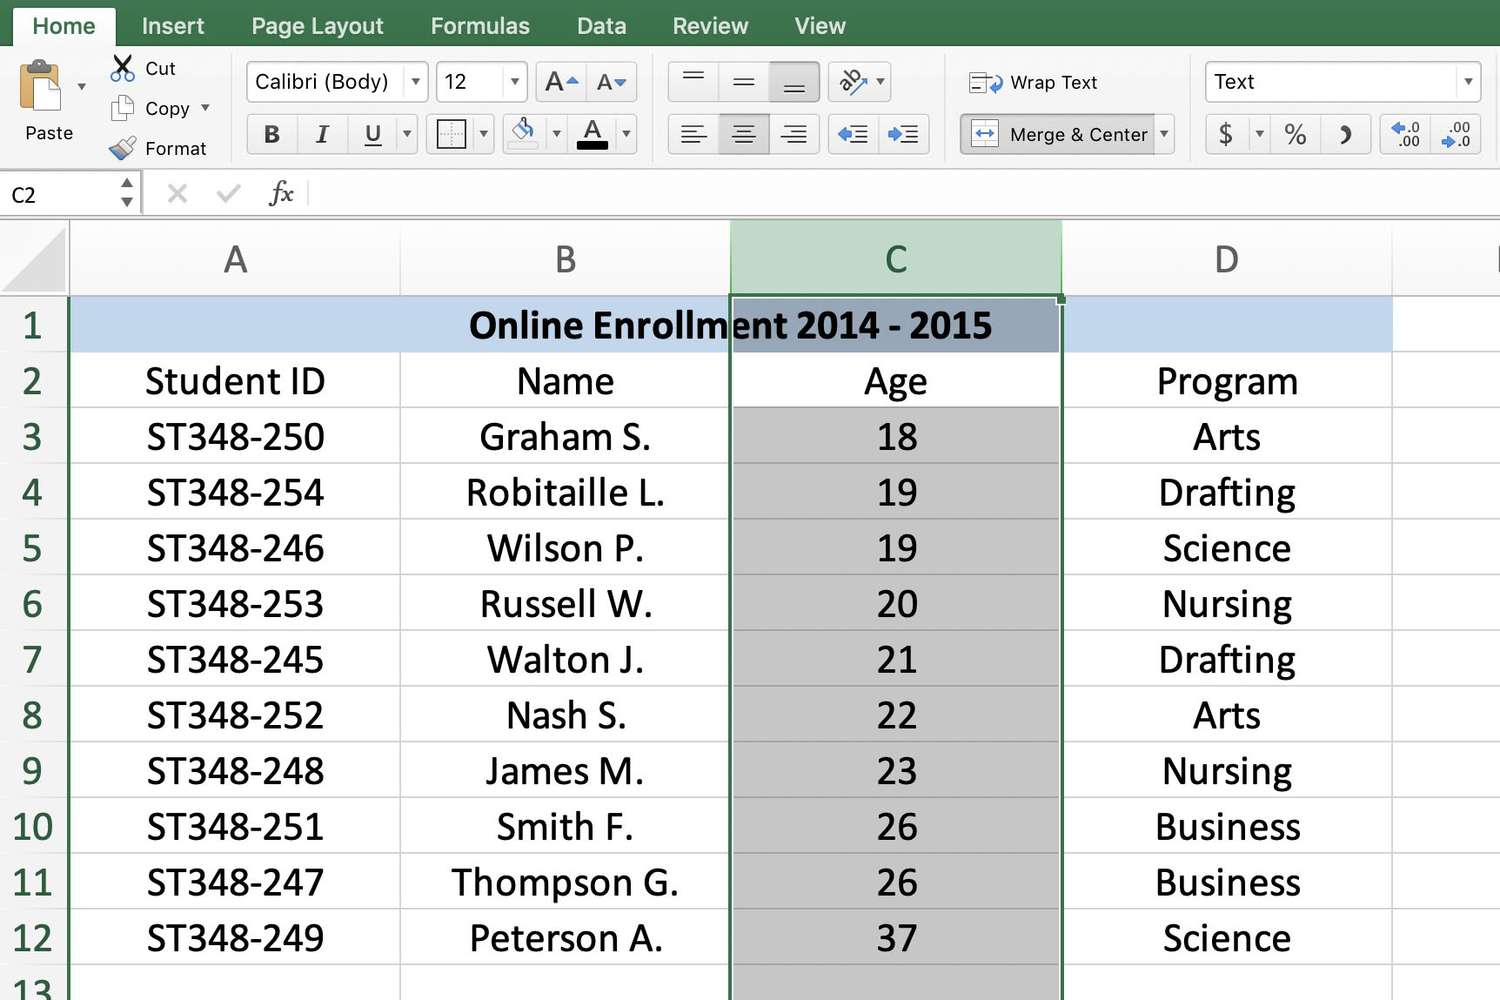 How To Select Whole Column In Excel